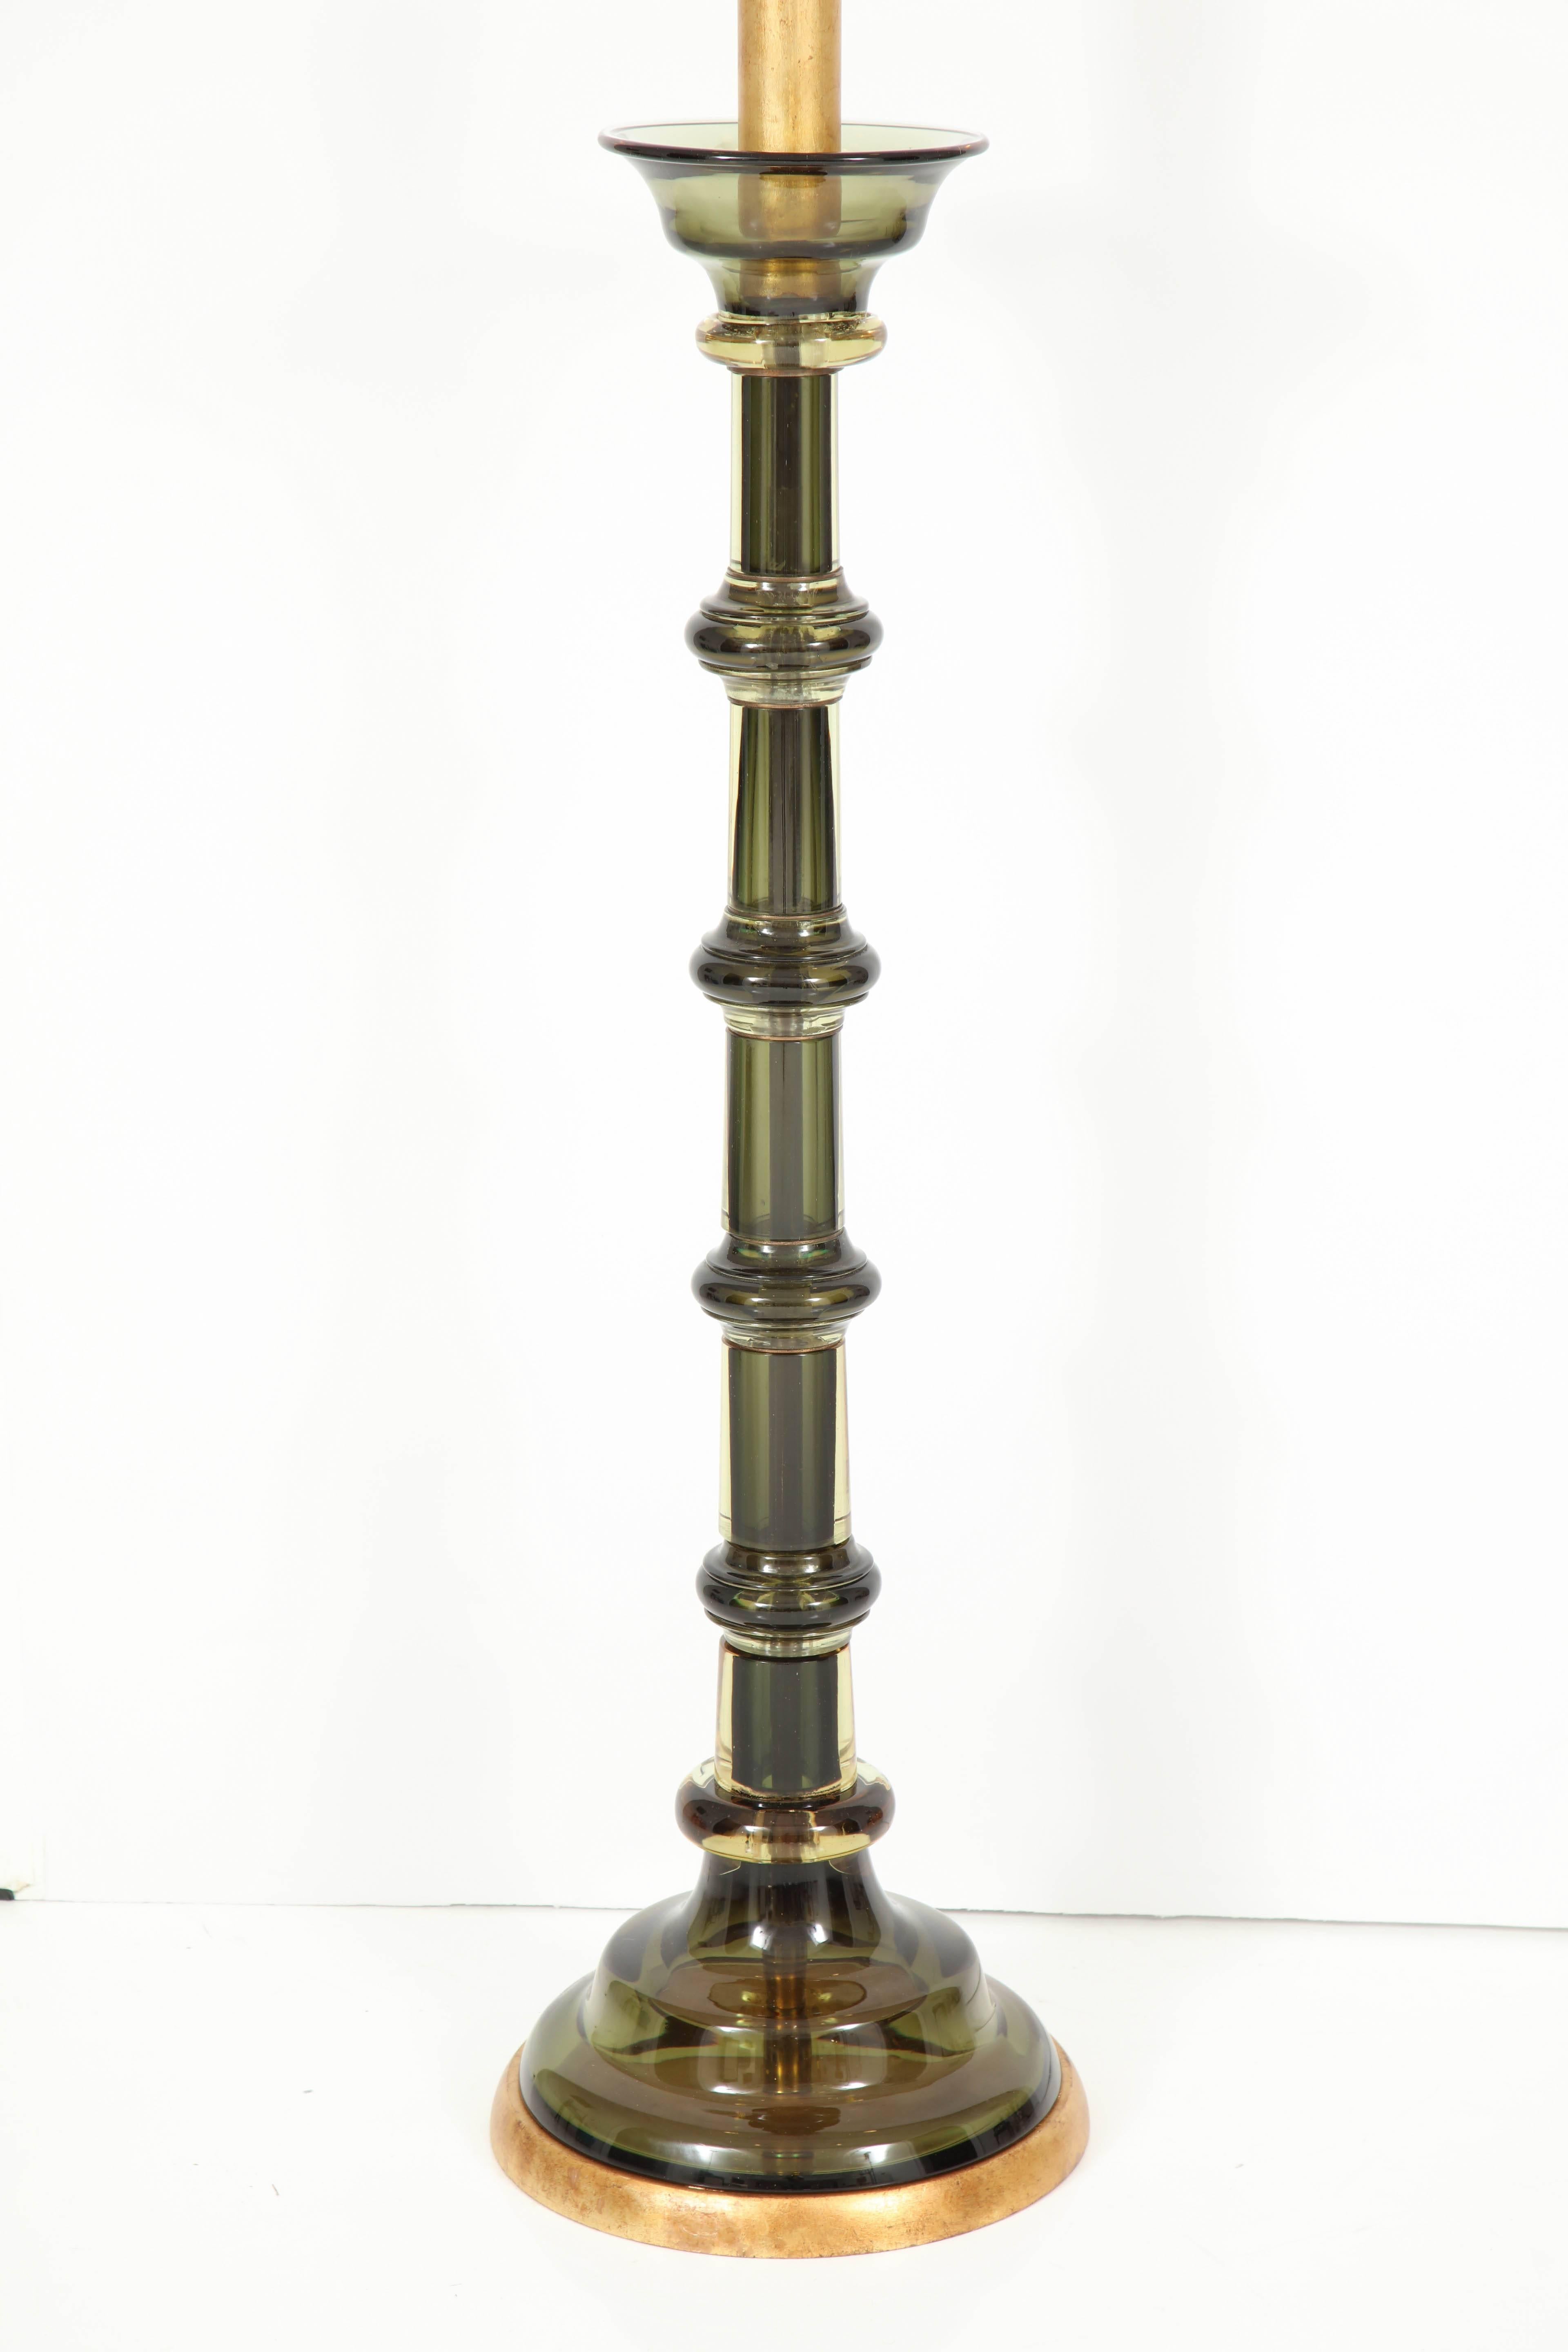 Spectacular floor lamp by Seguso.
The forest green Murano glass lamp body is mounted on a gold leaf base and has been newly rewired for the US with a polished brass double cluster.